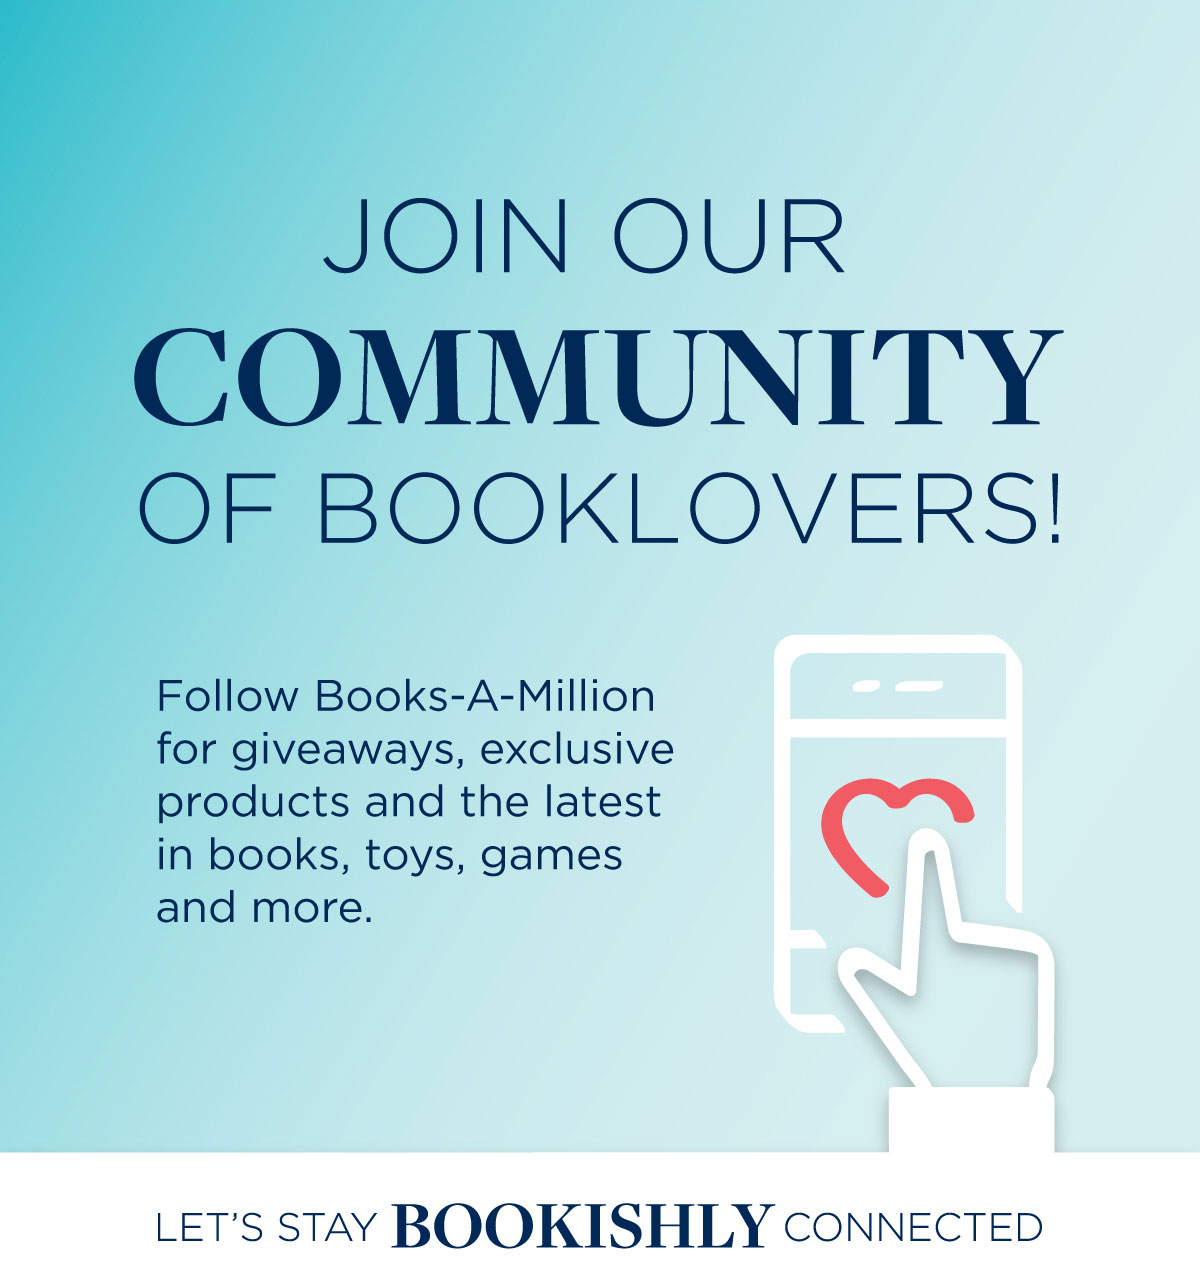 Join Our Community of Booklovers!